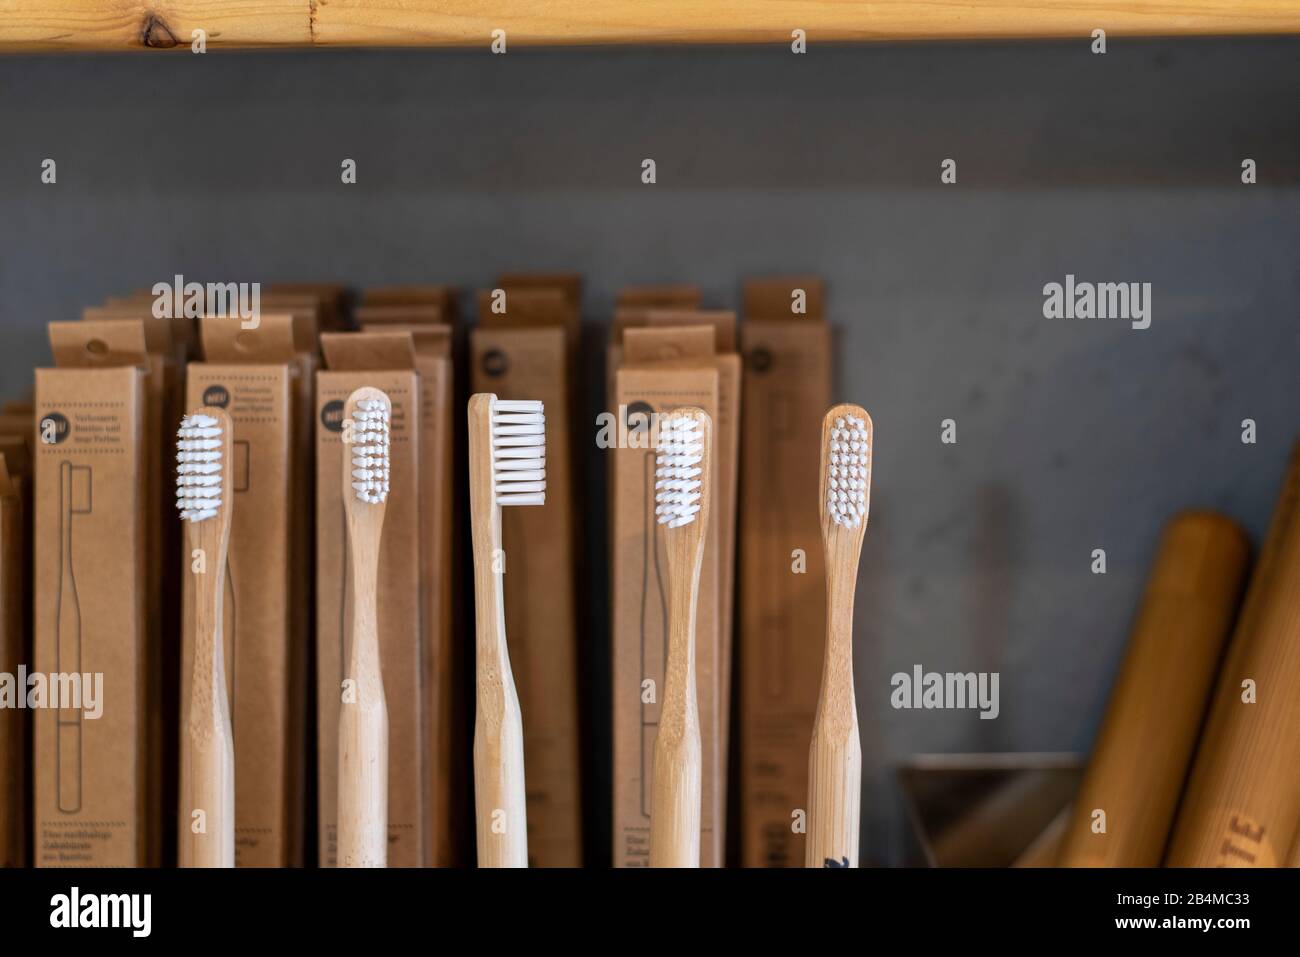 View of toothbrushes in an unwrapped shop Stock Photo